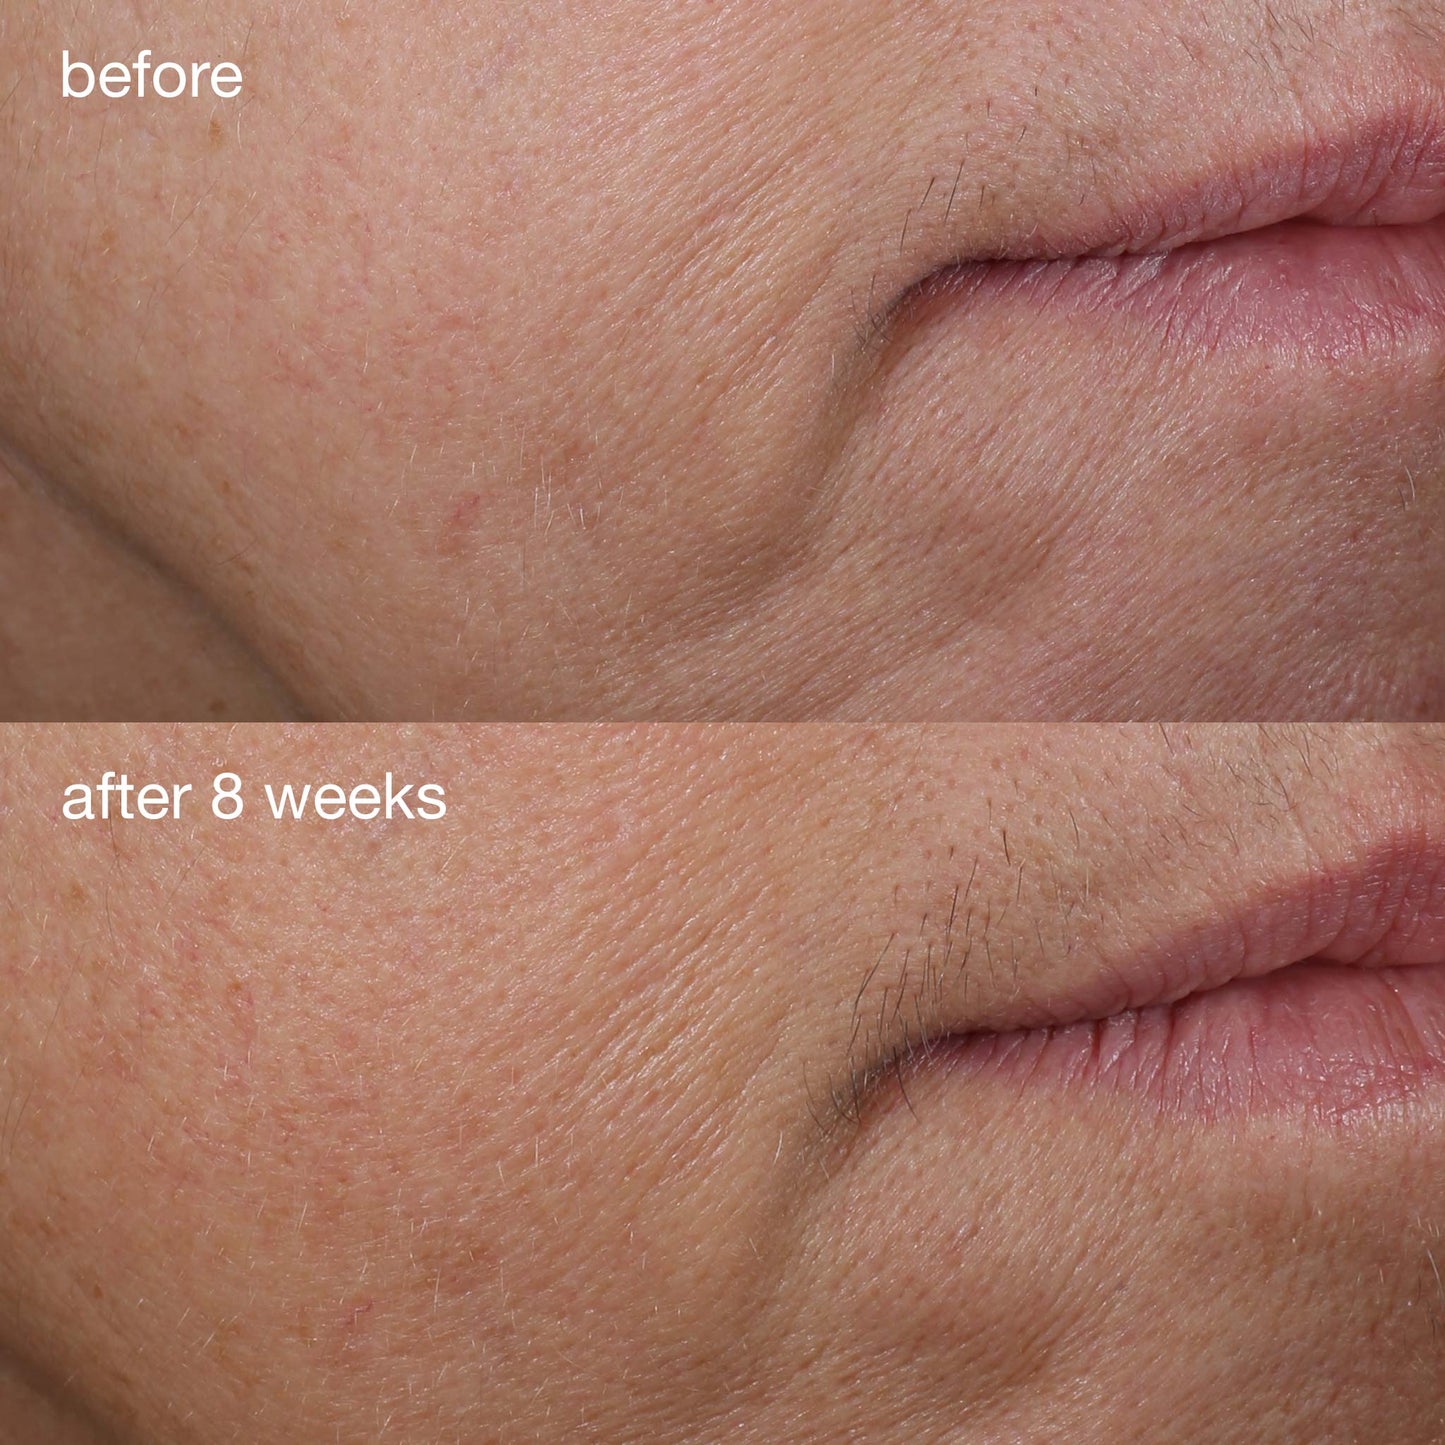 phyto nature firming serum before and after 8 weeks